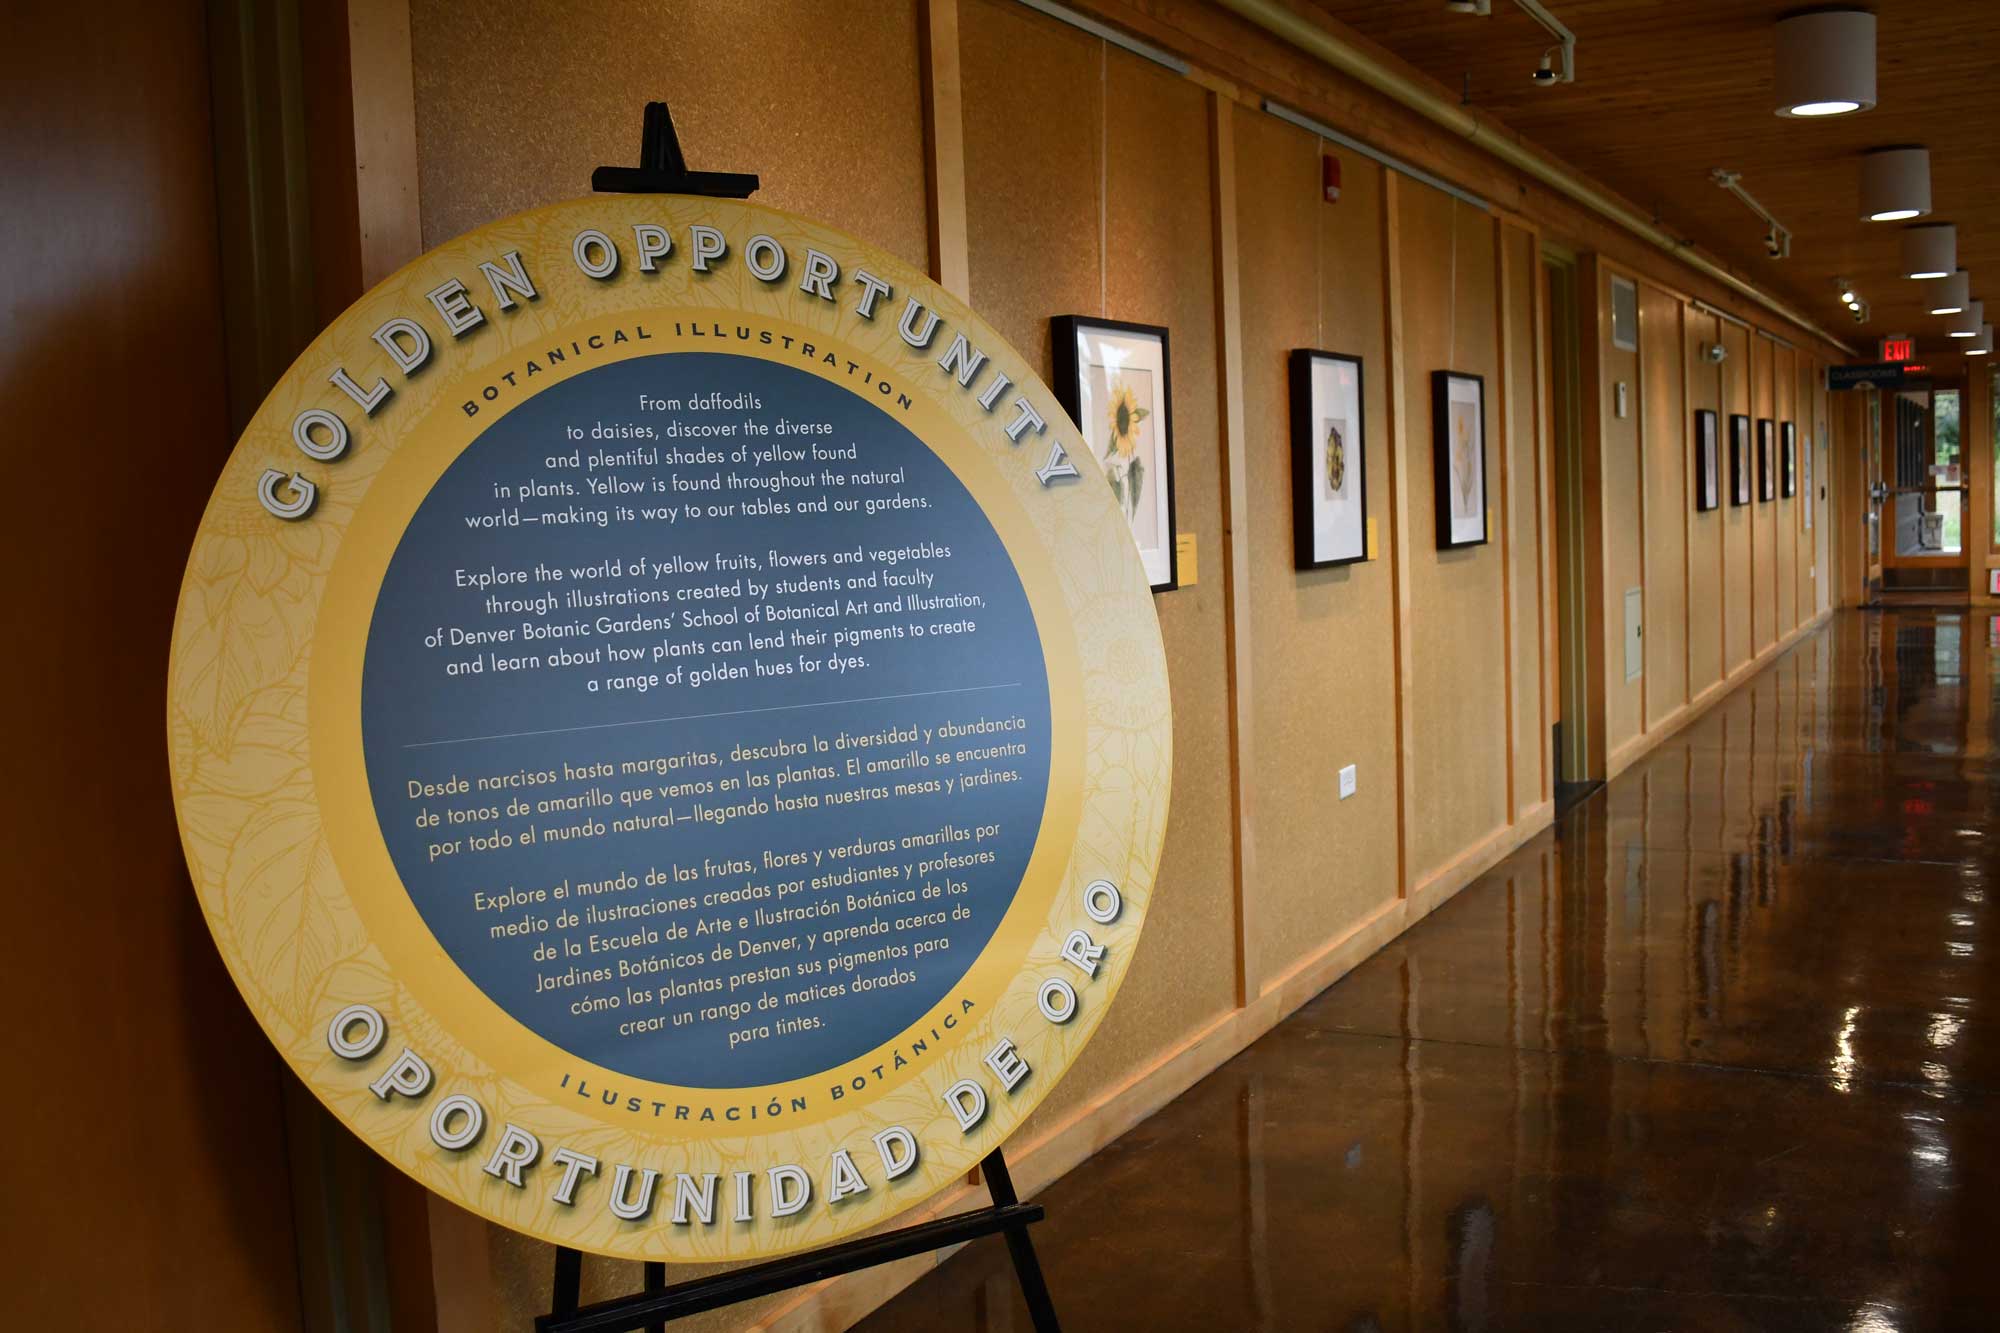 A sign explaining what the Golden Opportunity exhibit entails.